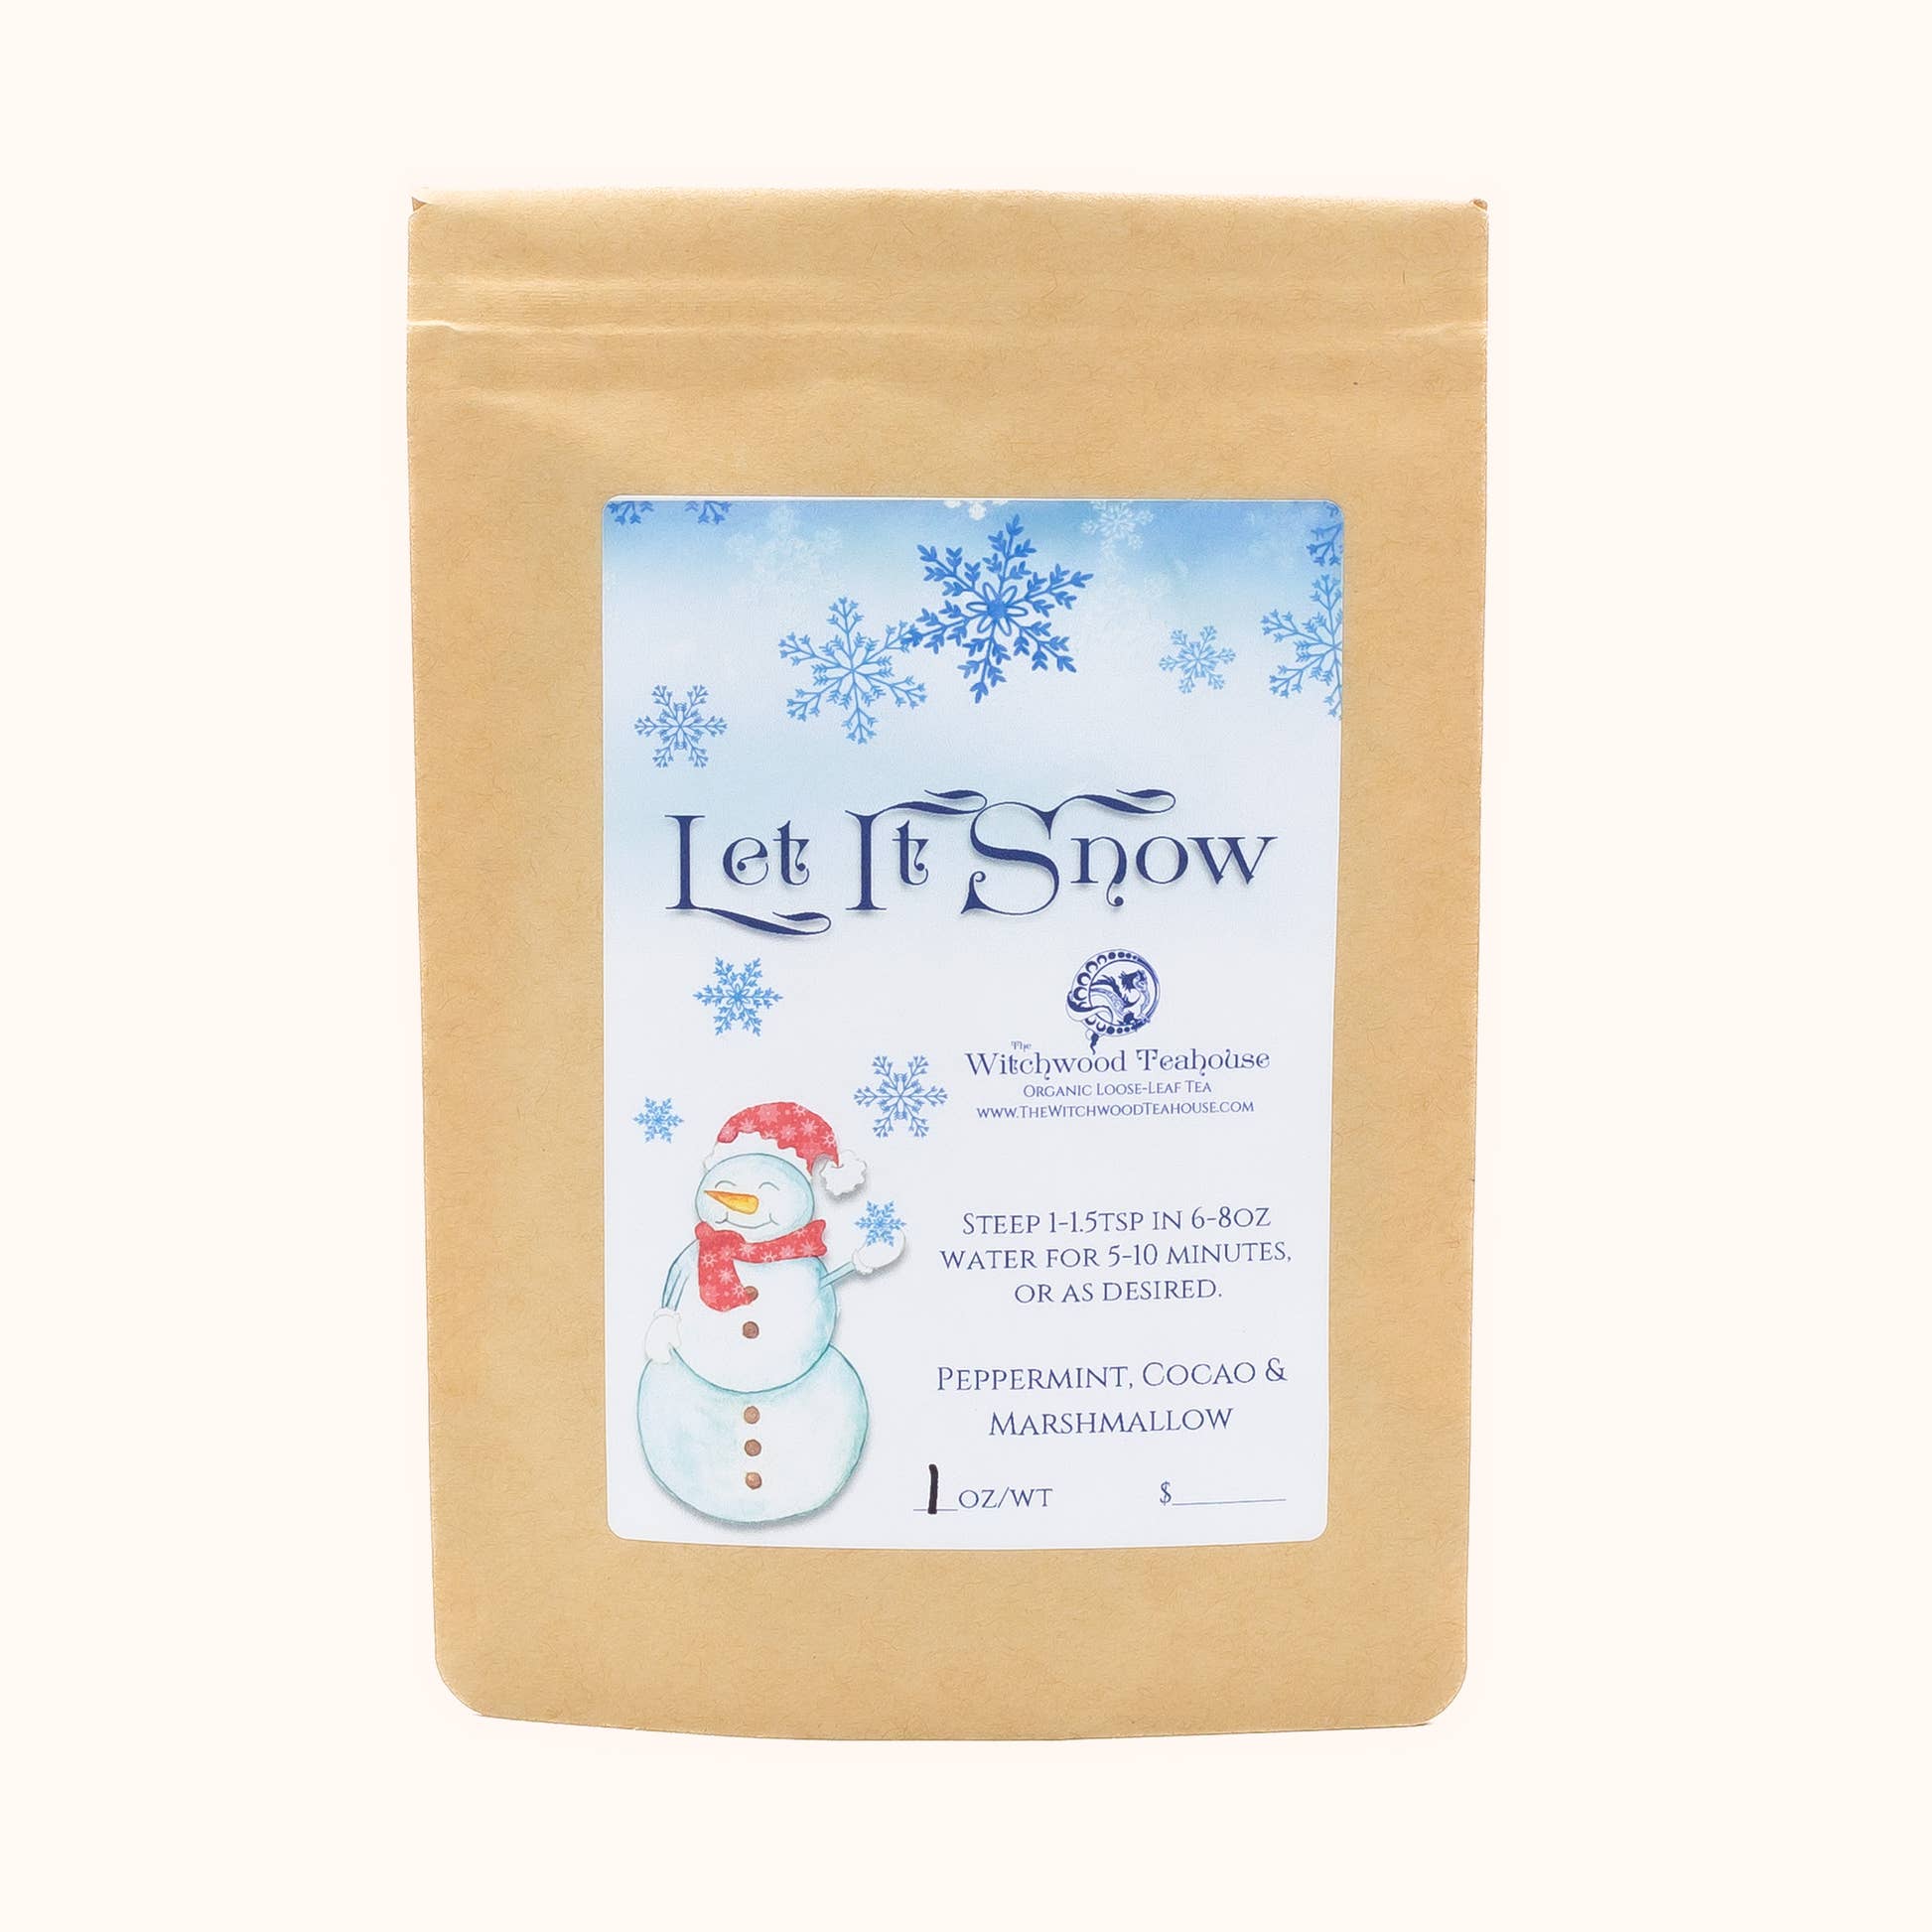 Let It Snow by Witchwood Teahouse loose leaf tea pouch